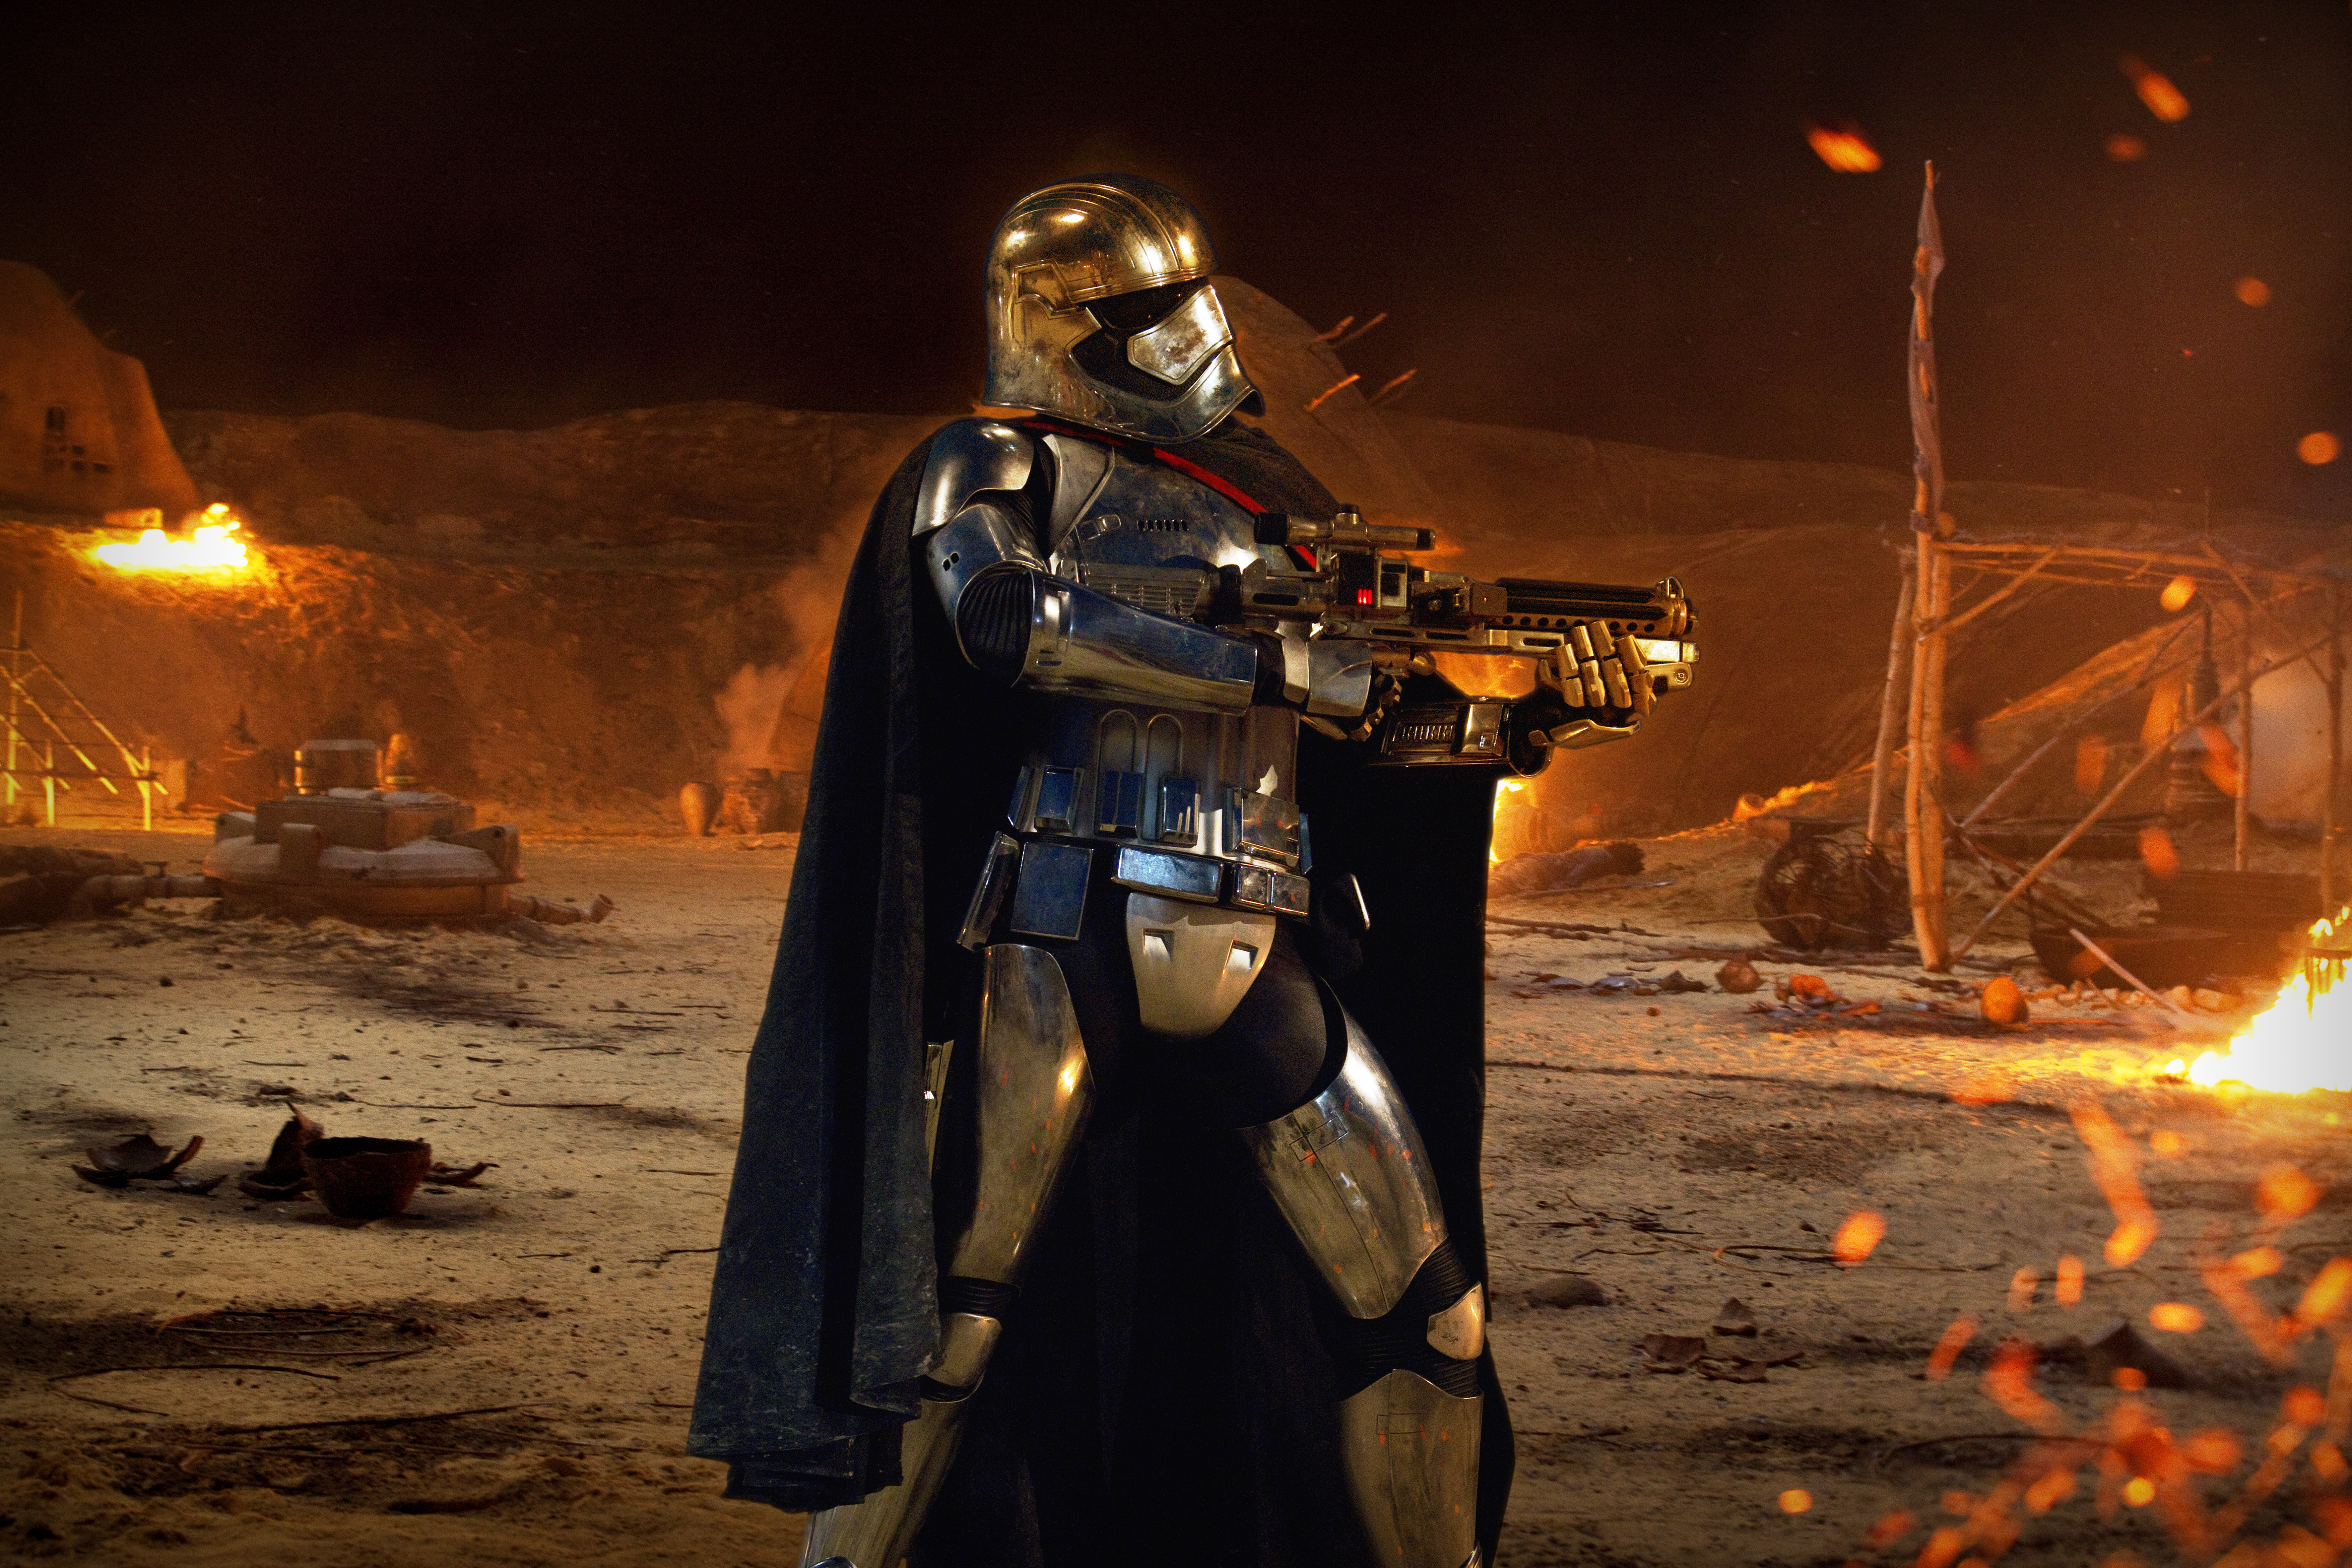 android movie, star wars episode vii: the force awakens, captain phasma, star wars